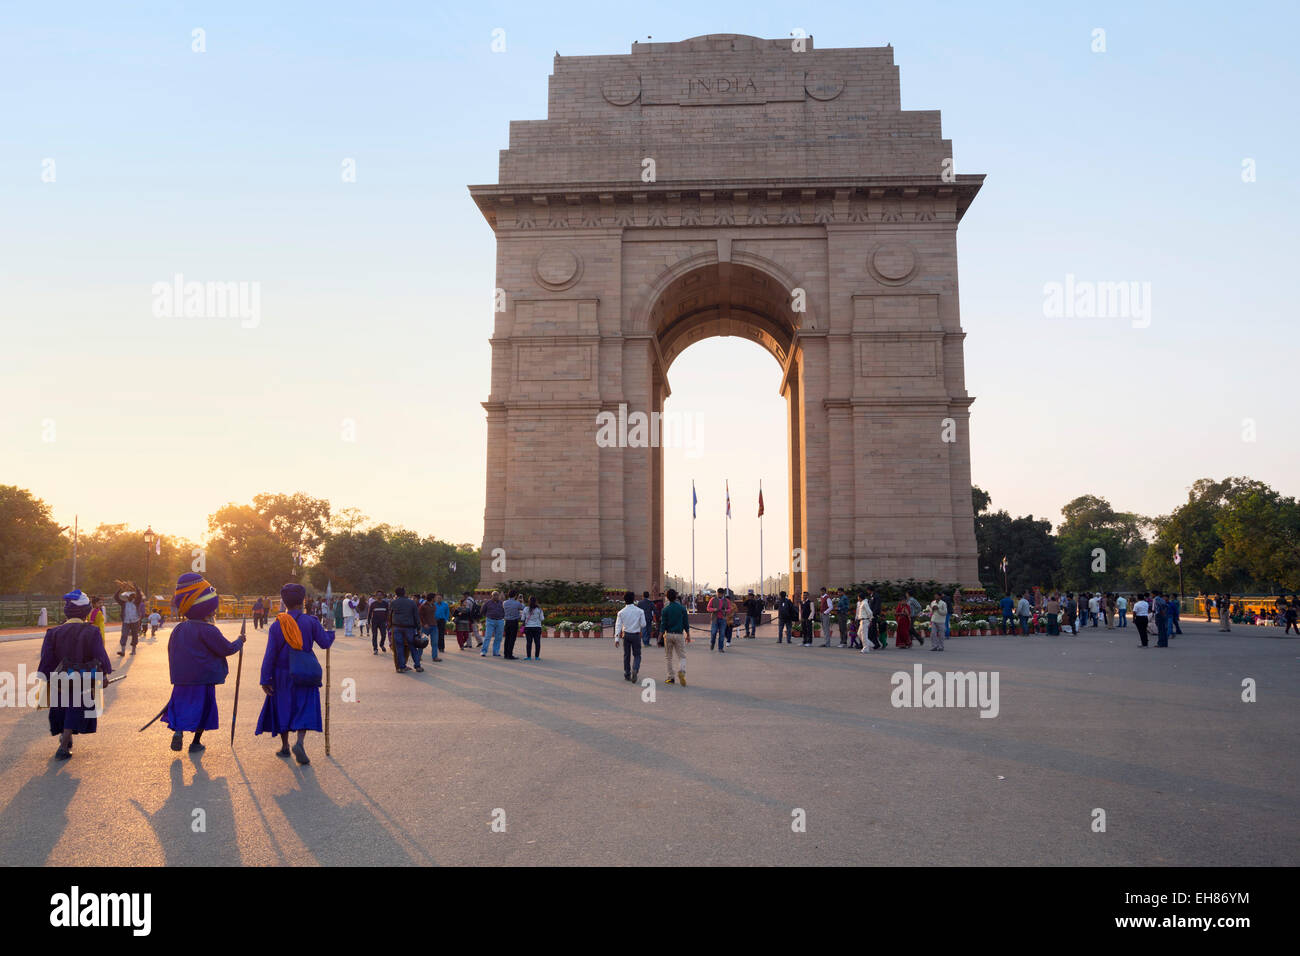 Sikhs at India Gate, designed by Sir Edwin Lutyens, New Delhi, India, Asia Stock Photo